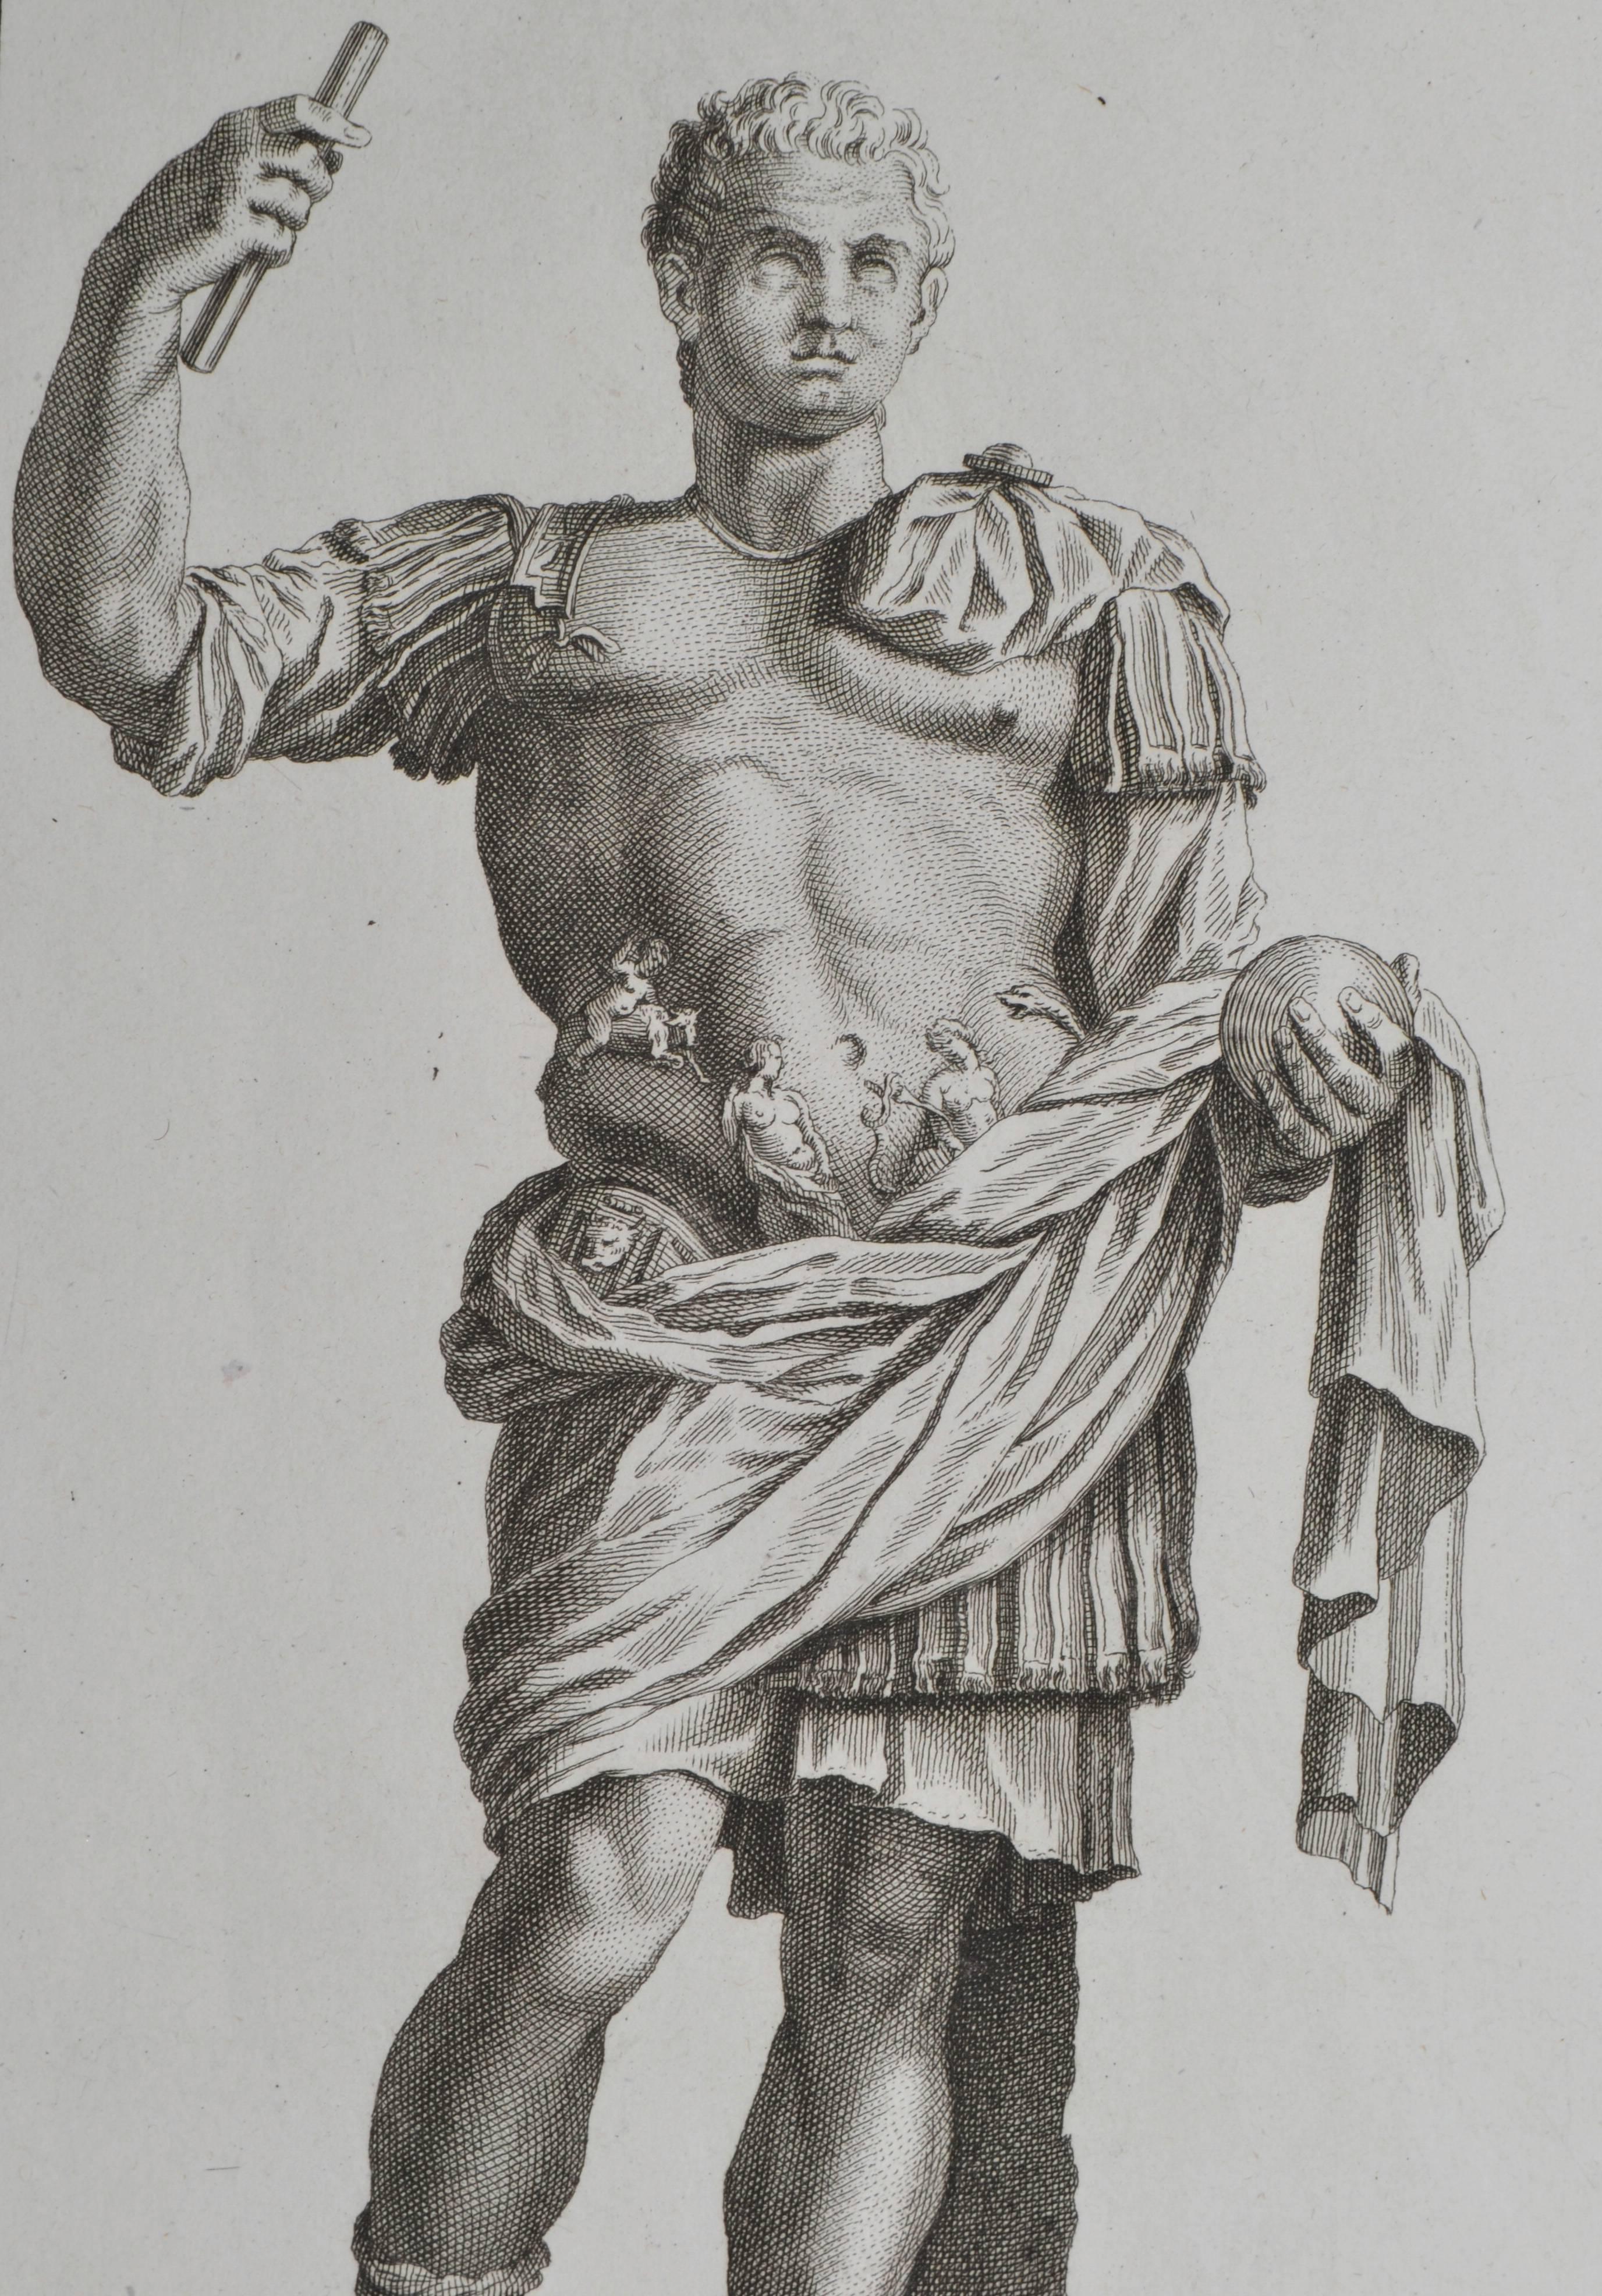 Copper plate engraving featuring the Emperor Domitian in Military Uniform.
From the book L'antiquite Expliquee et Representee en Figures. By the Benedisctine Monk Bernard de Montfaucon.
In mat and ready to frame.